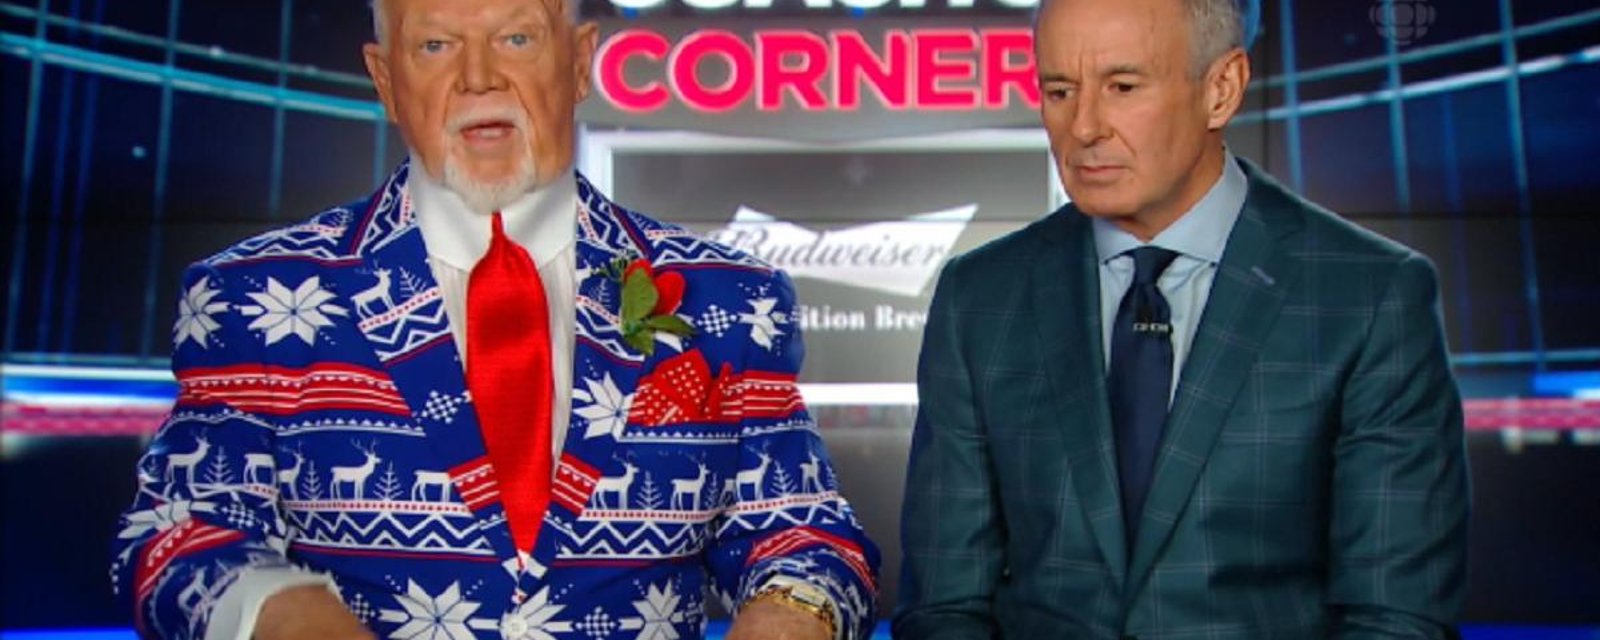 Don Cherry tells it as it is in regards to Gerard Gallant firing.